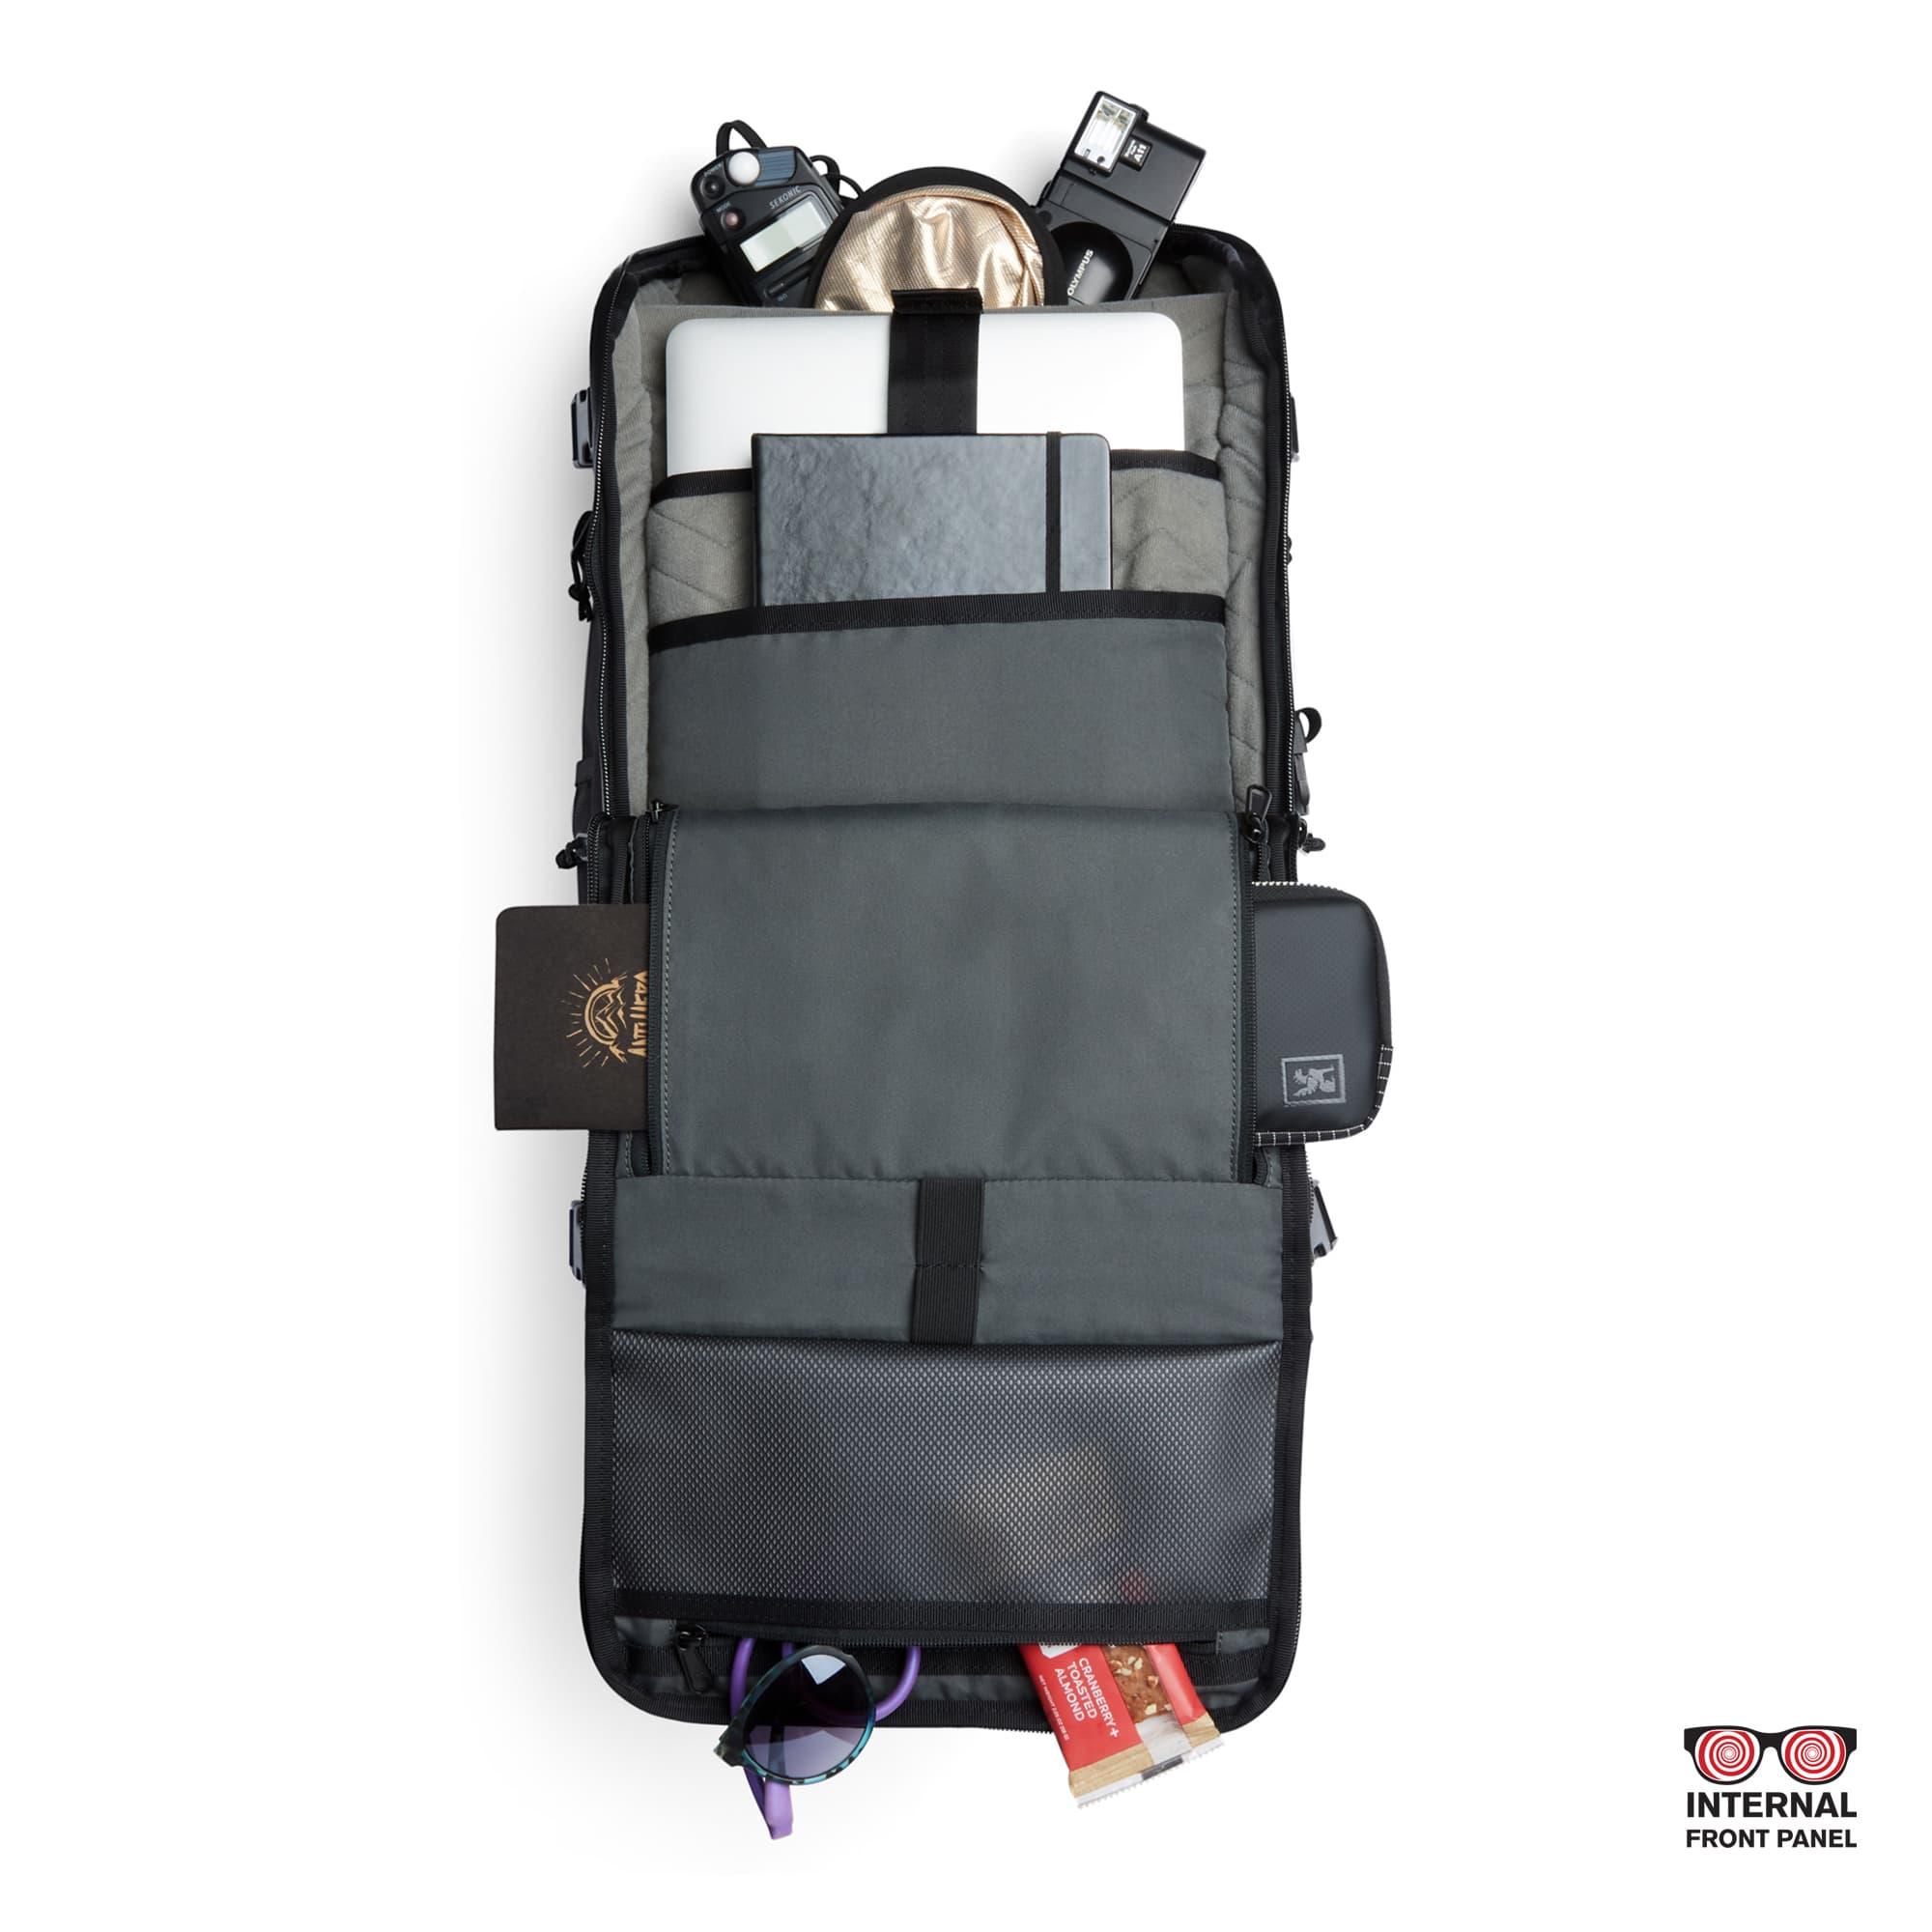 Niko camera tech backpack in black inside out pockets showing